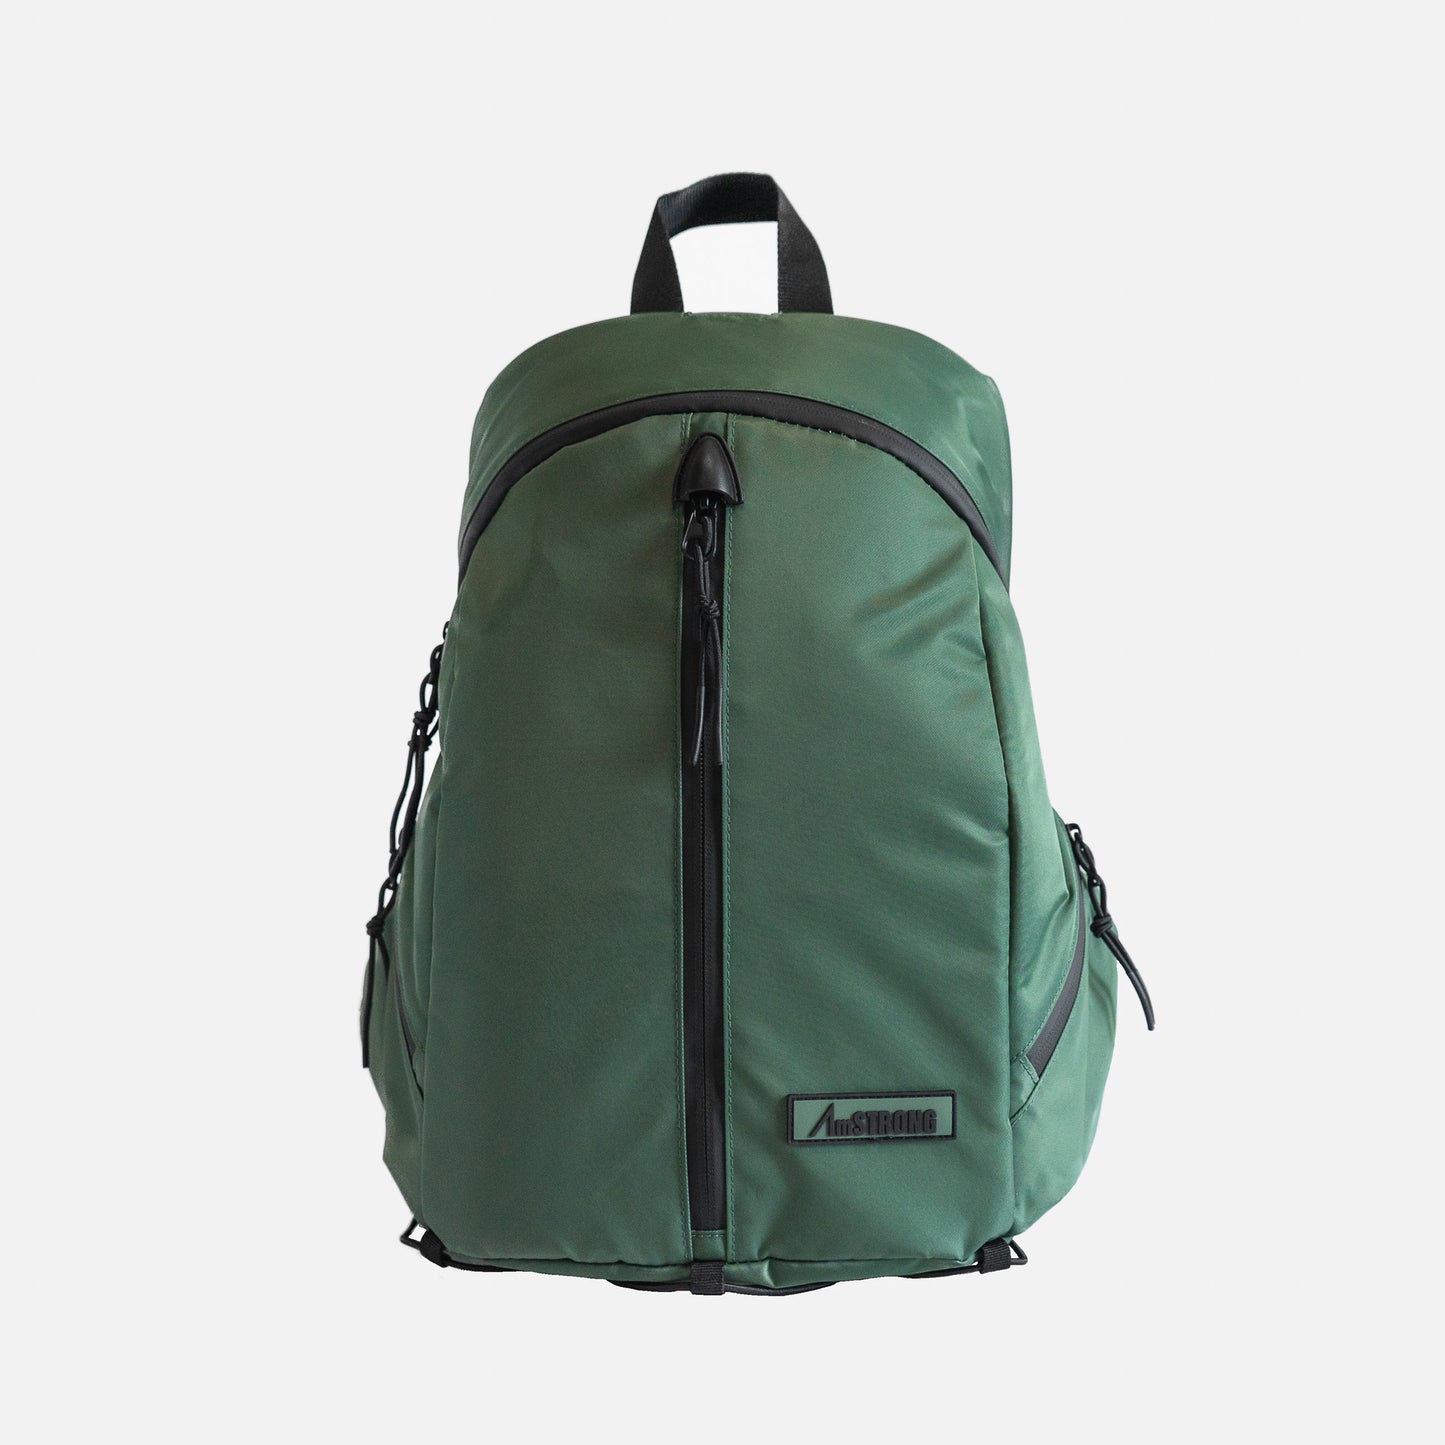 01-INSULATED BACKPACK | Ripe Olive